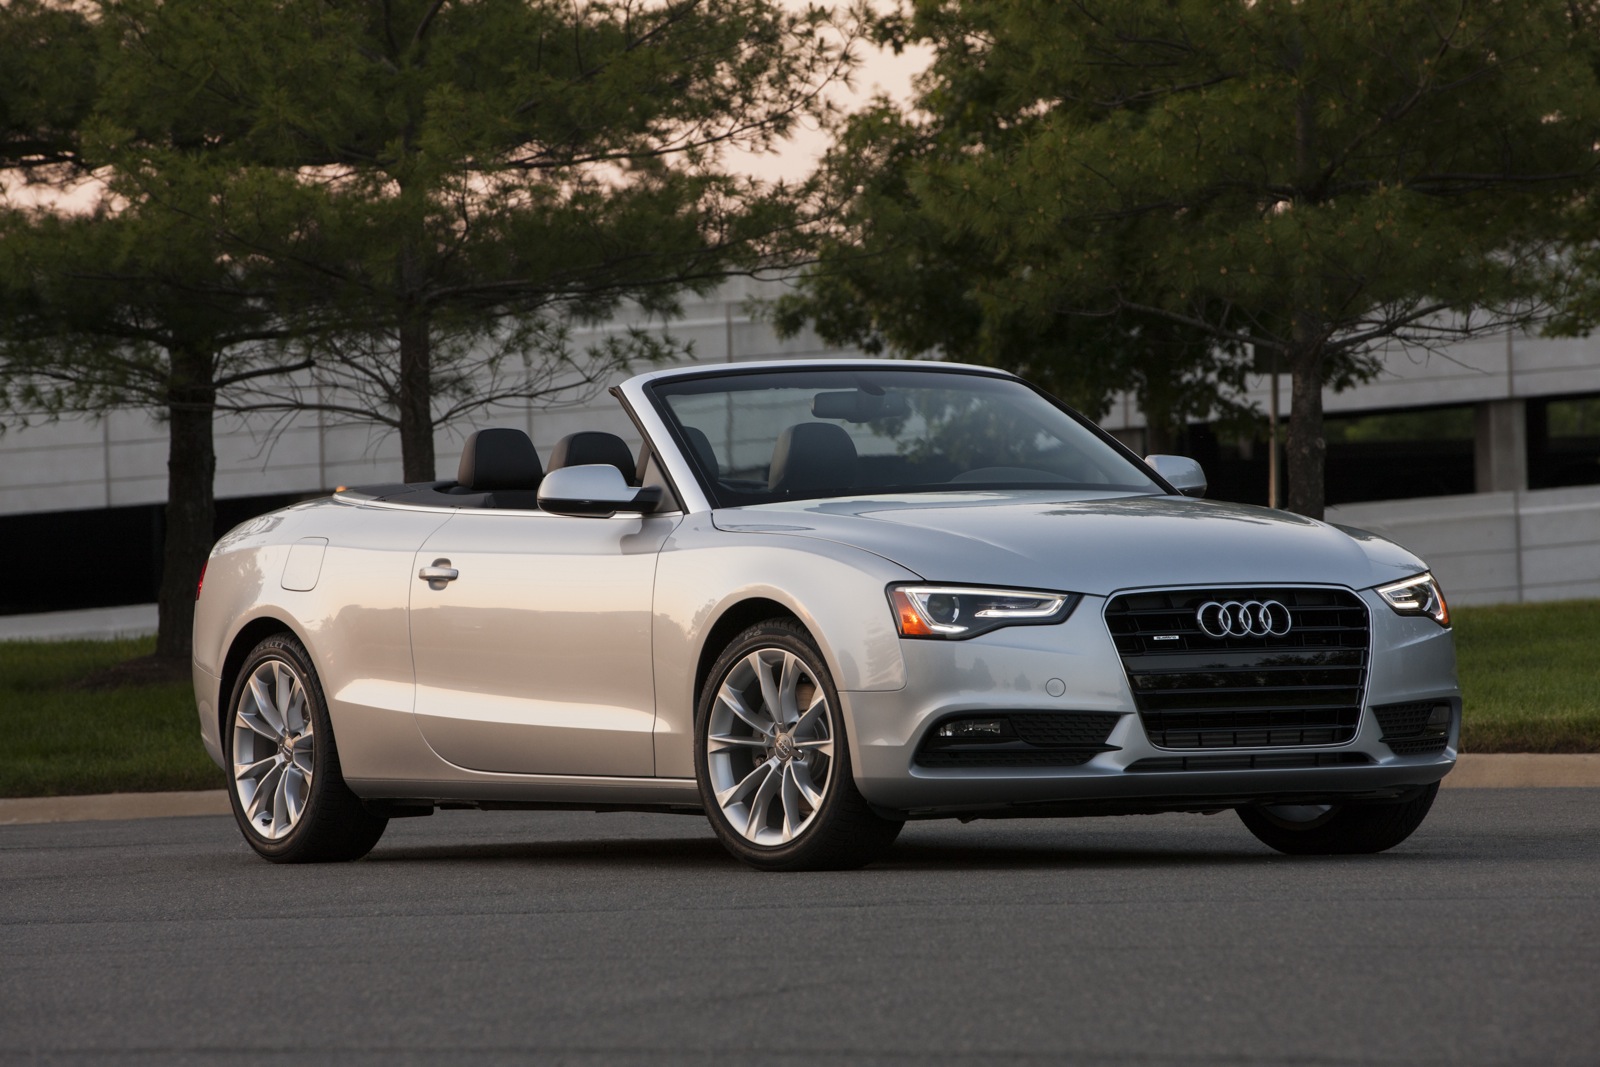 2013 Audi A5 Review, Ratings, Specs, Prices, and Photos - The Car Connection